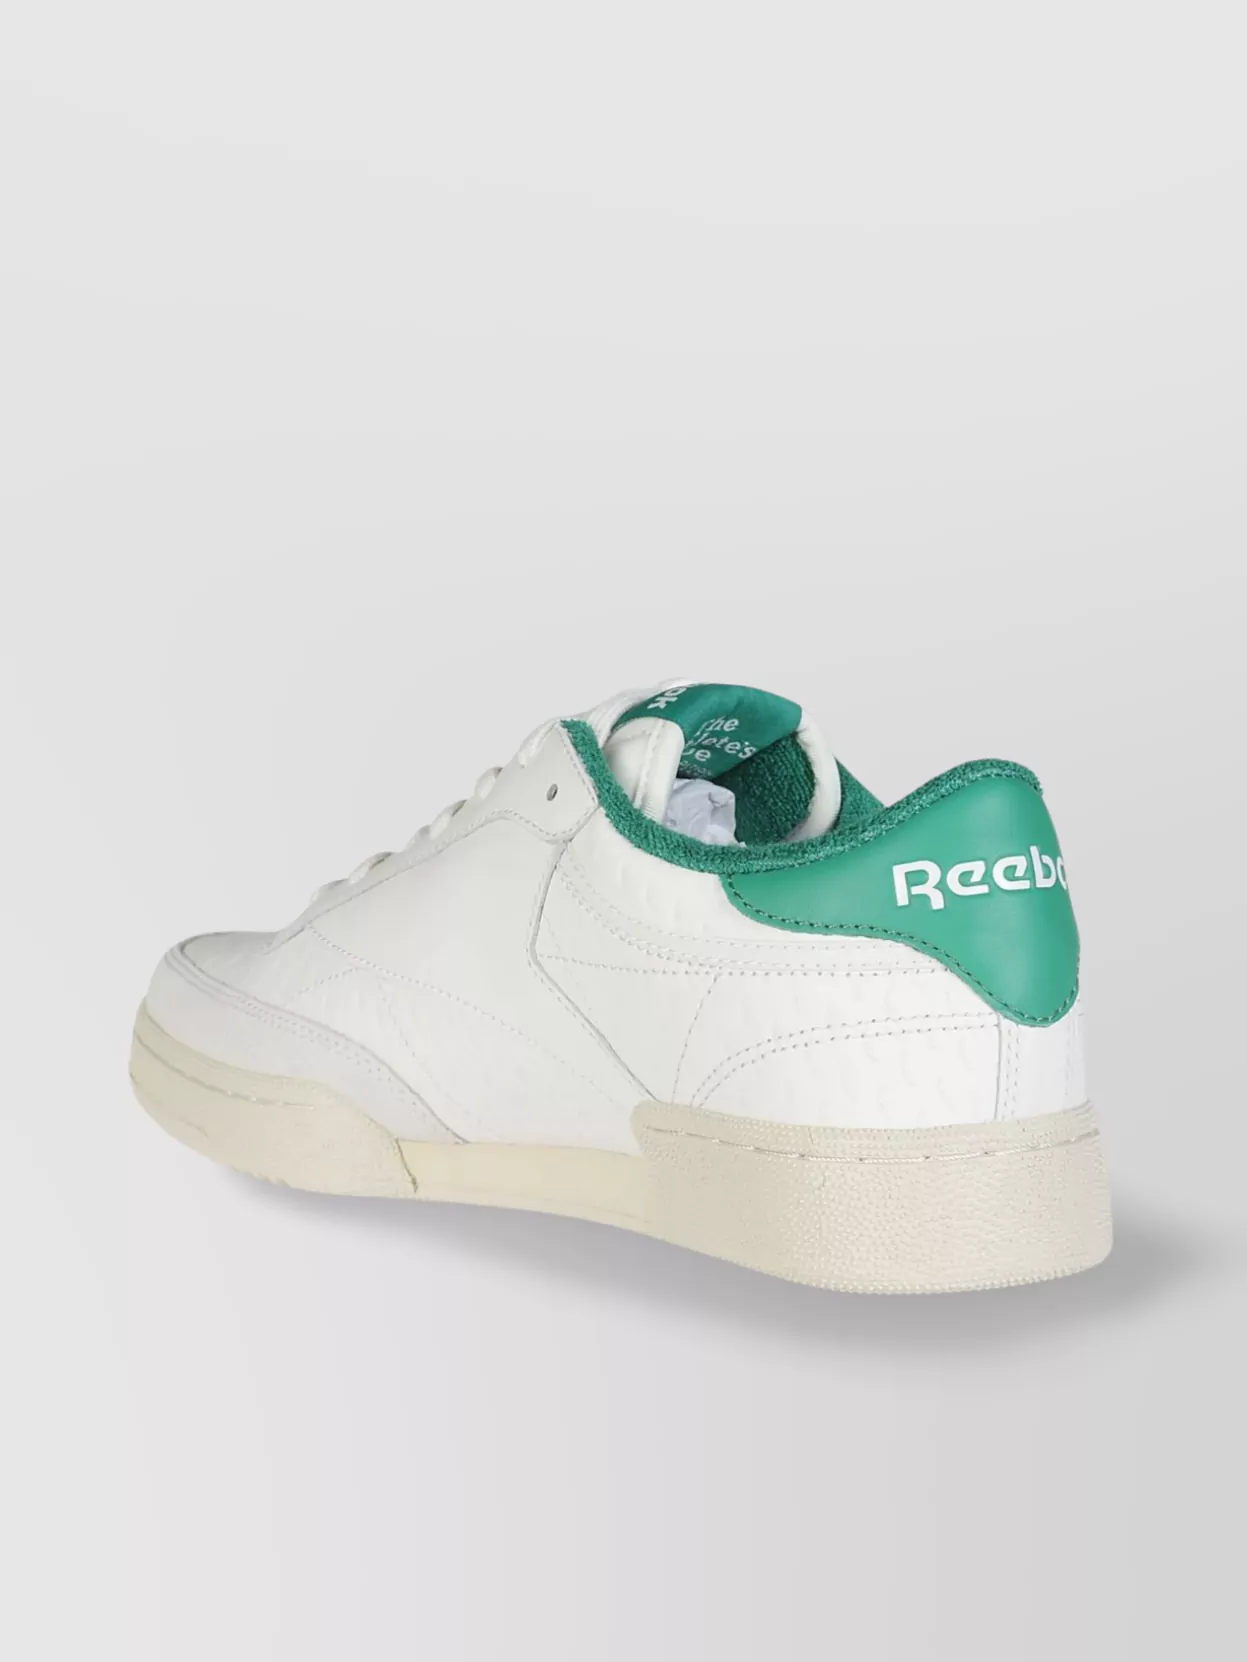 Shop Reebok Low-top Padded Collar Sneakers With Perforated Toe Box